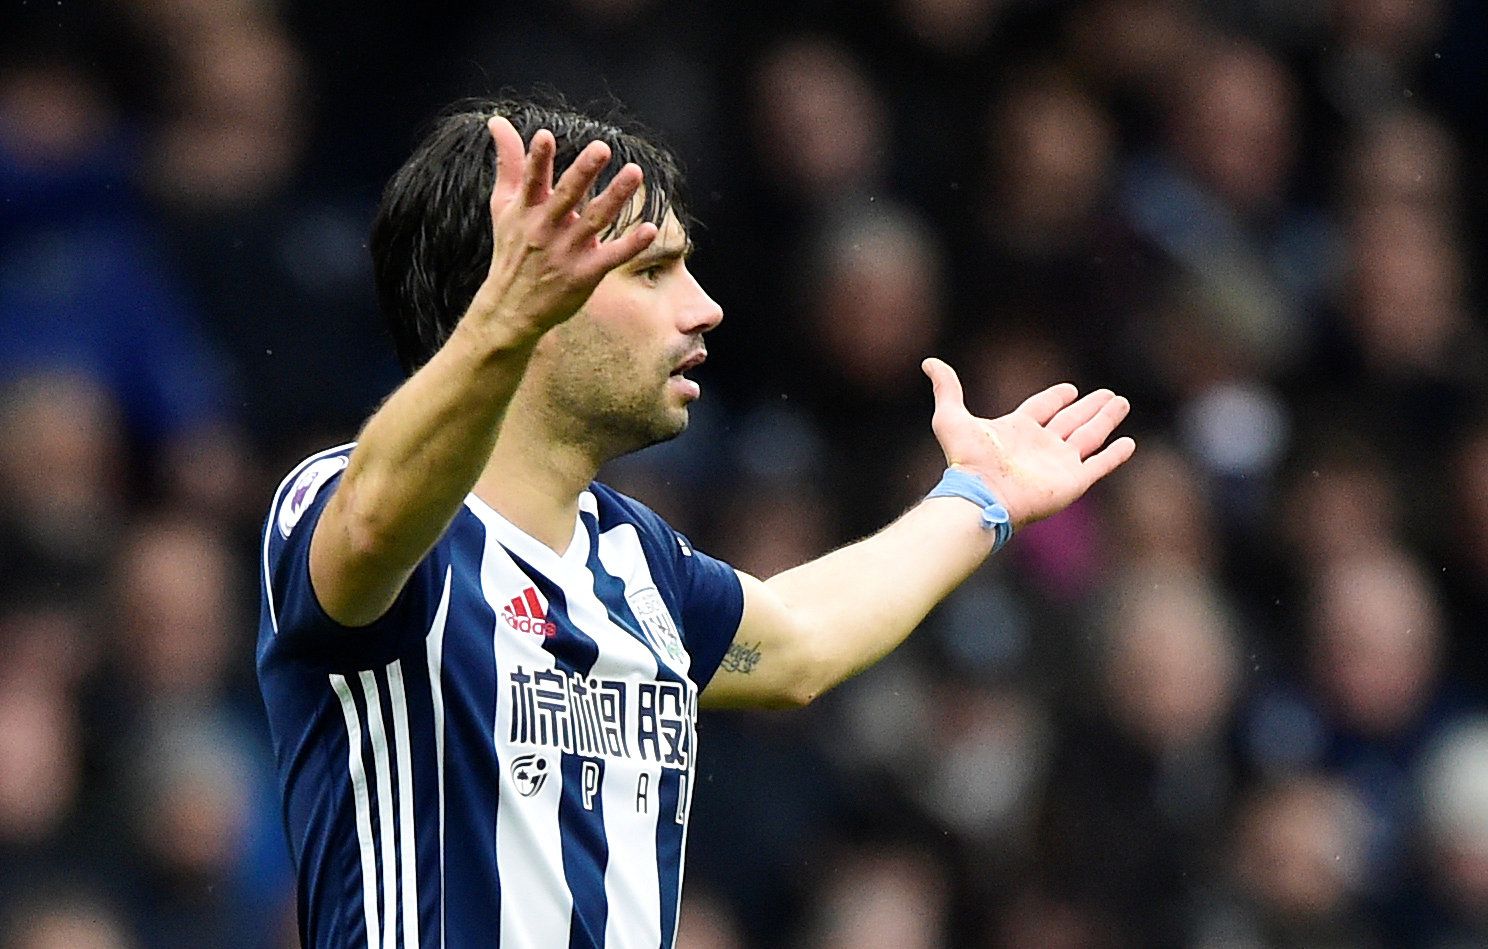 Soccer Football - Premier League - West Bromwich Albion vs Burnley - The Hawthorns, West Bromwich, Britain - March 31, 2018   West Bromwich Albion's Claudio Yacob reacts   REUTERS/Rebecca Naden    EDITORIAL USE ONLY. No use with unauthorized audio, video, data, fixture lists, club/league logos or 